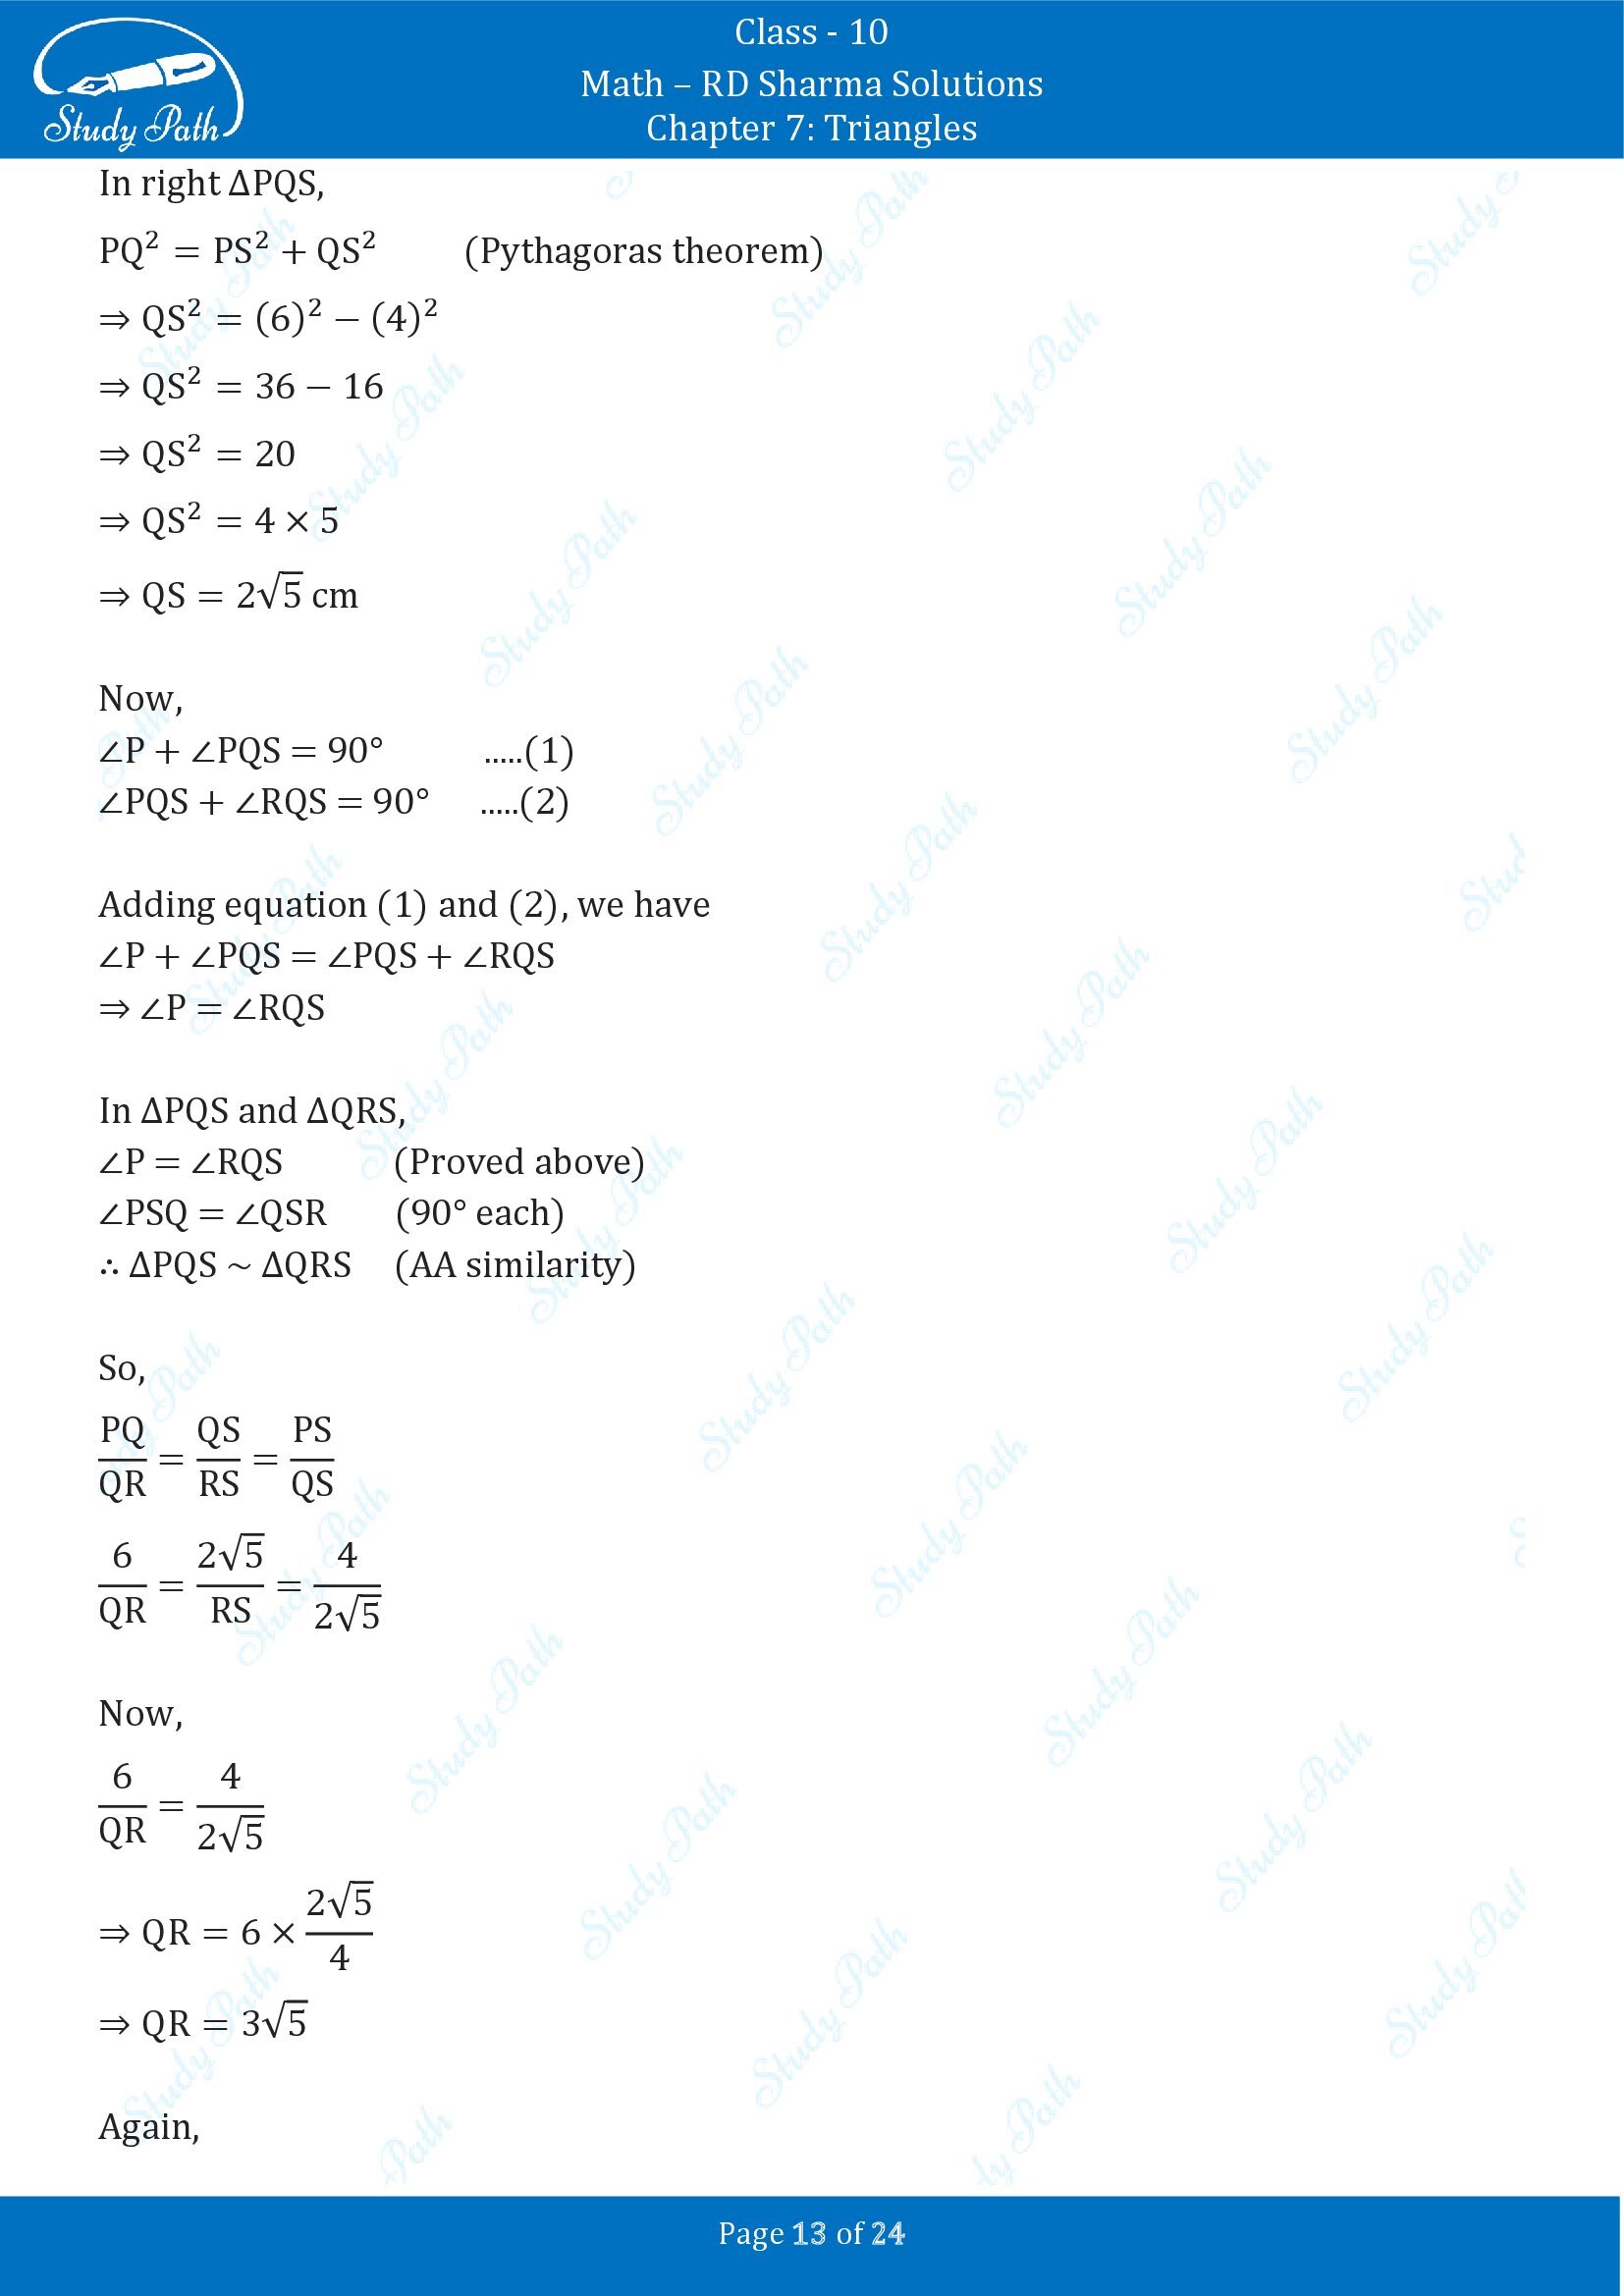 RD Sharma Solutions Class 10 Chapter 7 Triangles Fill in the Blank Type Questions FBQs 00013